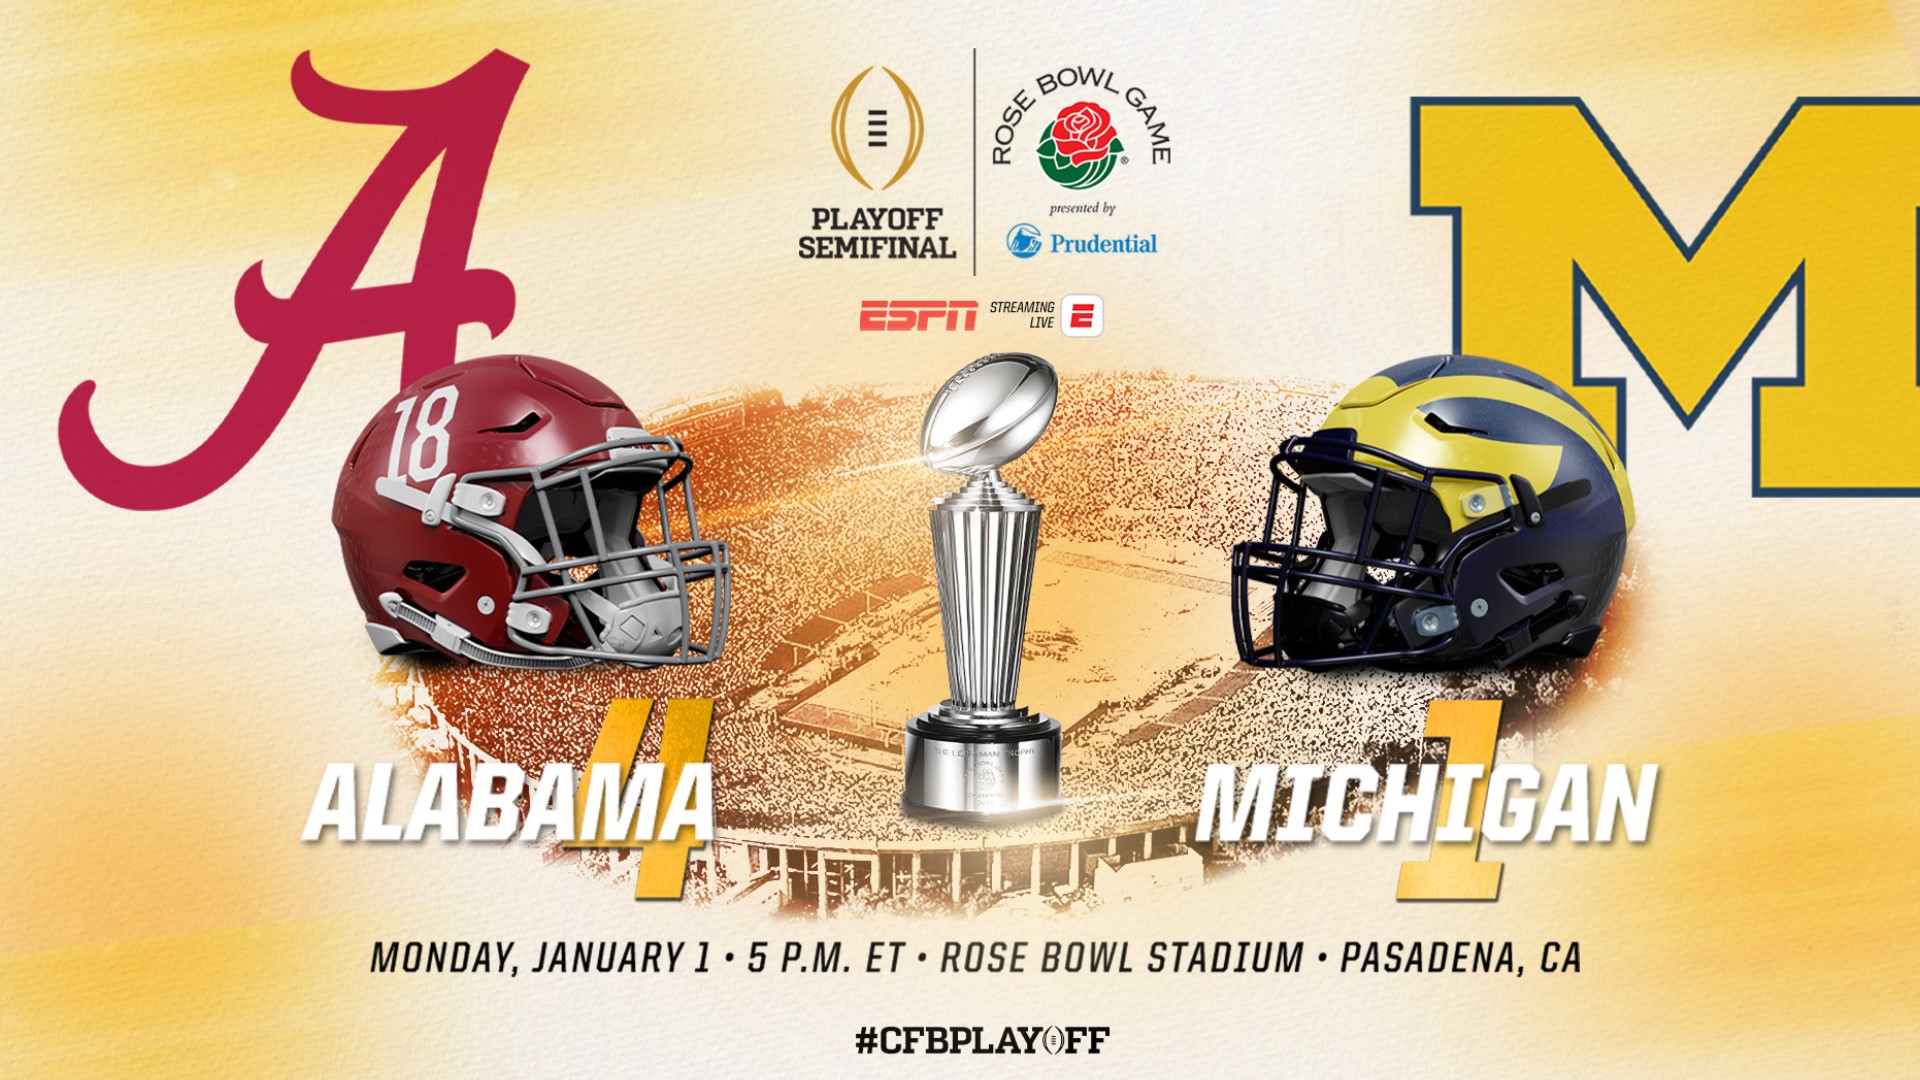 Michigan, champions of the Big Ten Conference, and Alabama, champions of the Southeastern Conference, will face each other in the College Football Playoff Semifinal.